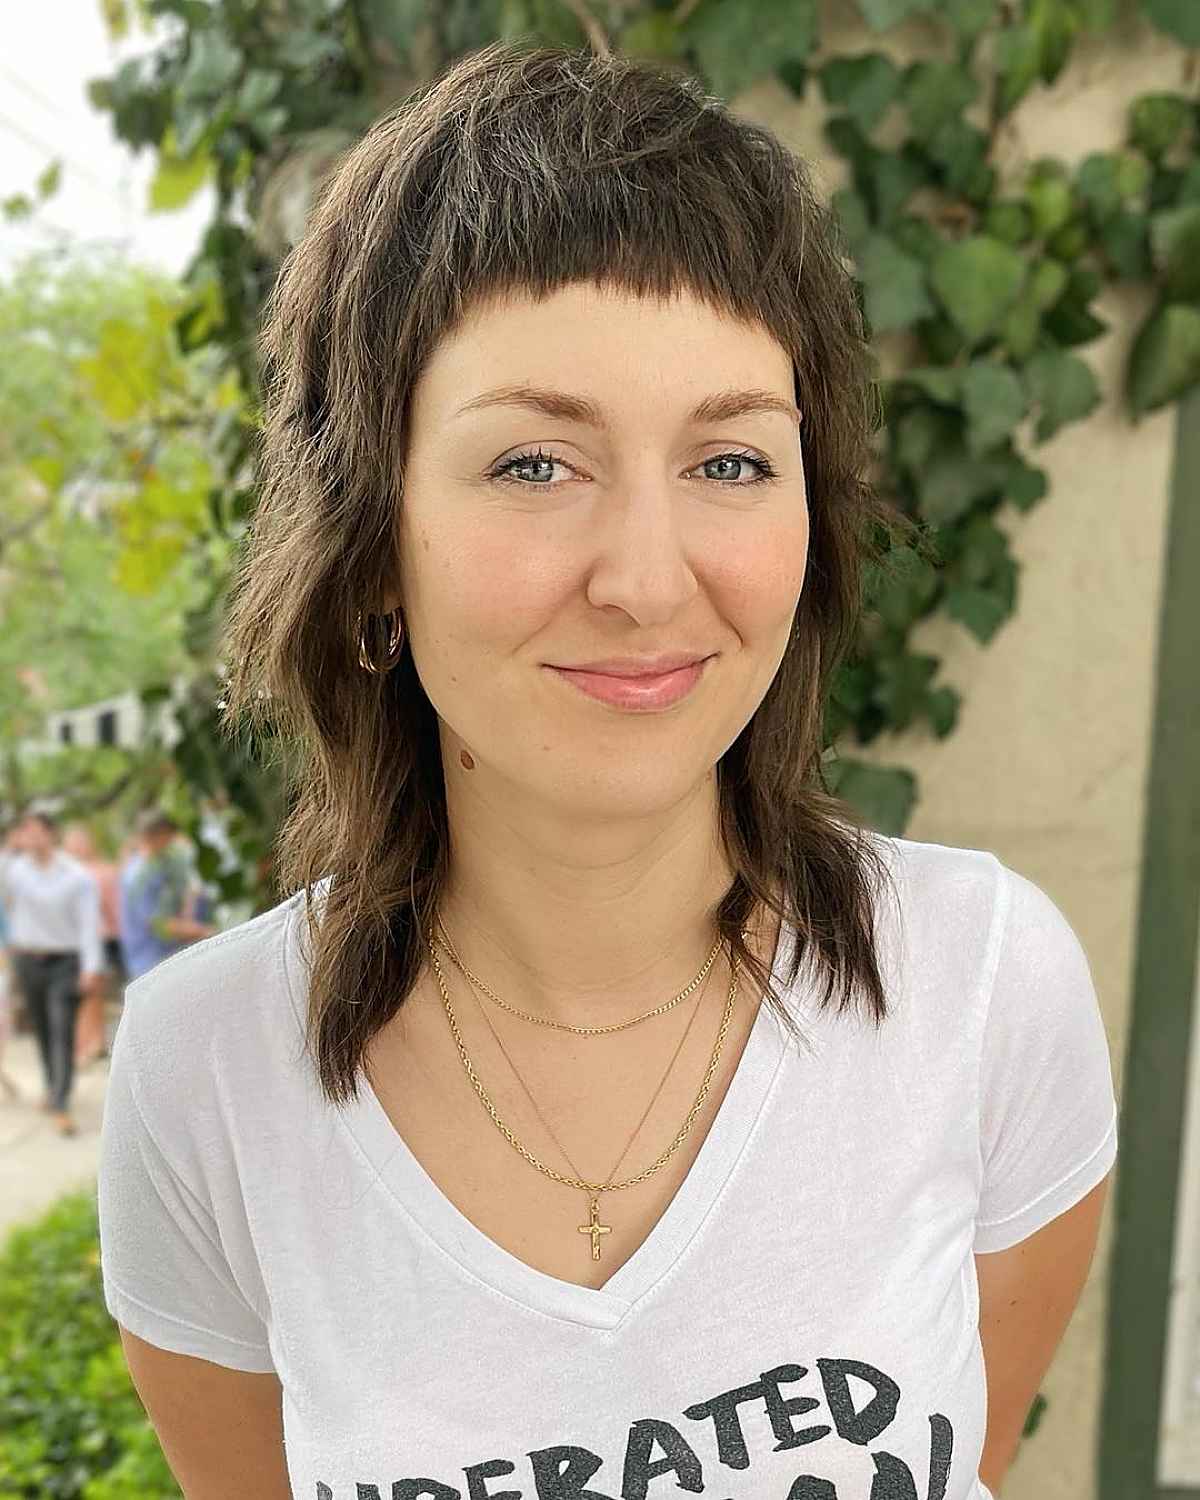 shaggy mullet with fringe bangs